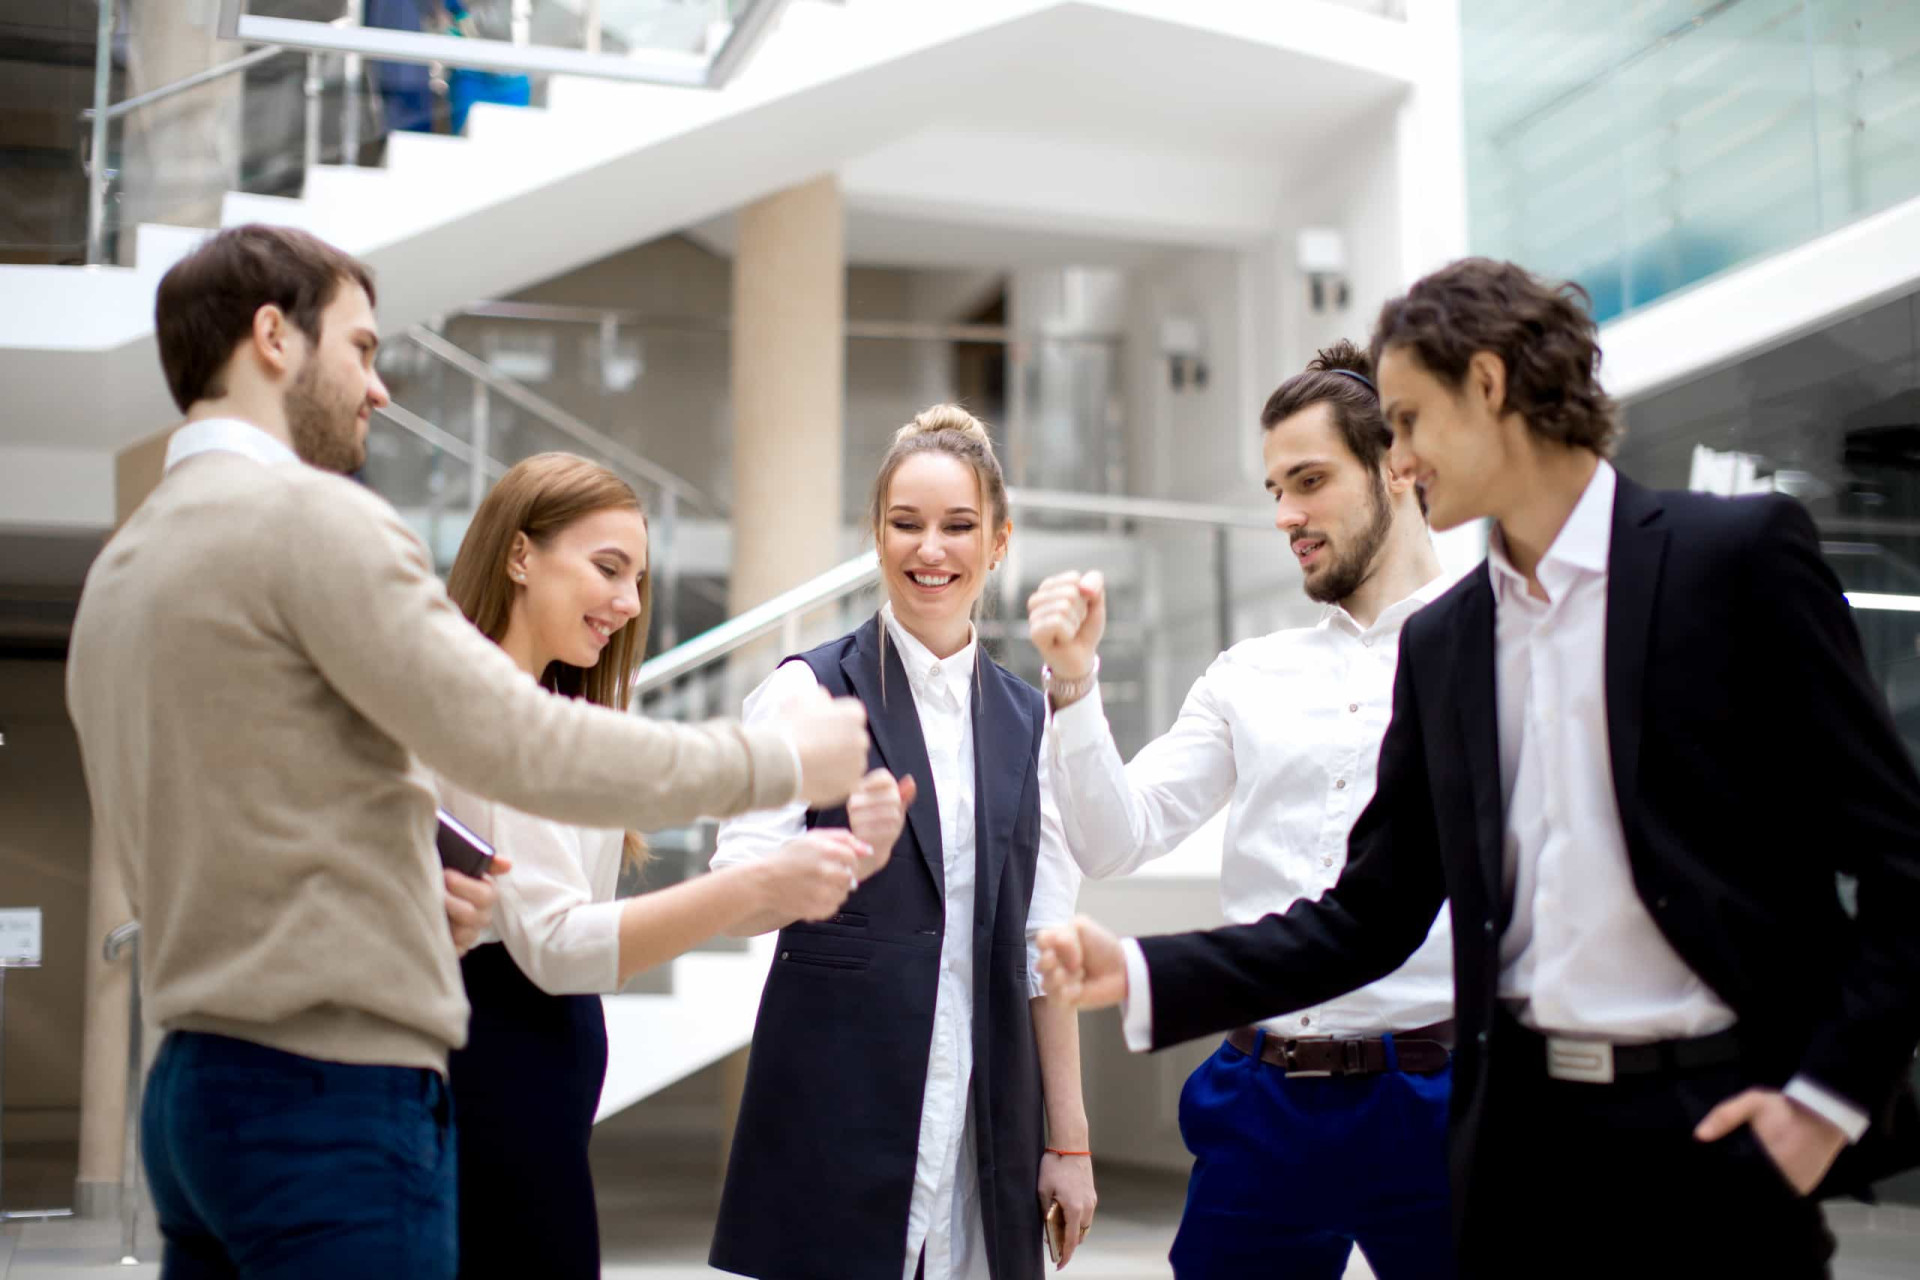 <p>Many team-building activities put on by companies have the aim of improving the critical thinking skills of employees.</p><p><a href="https://www.msn.com/en-za/community/channel/vid-7xx8mnucu55yw63we9va2gwr7uihbxwc68fxqp25x6tg4ftibpra?cvid=94631541bc0f4f89bfd59158d696ad7e">Follow us and access great exclusive content every day</a></p>